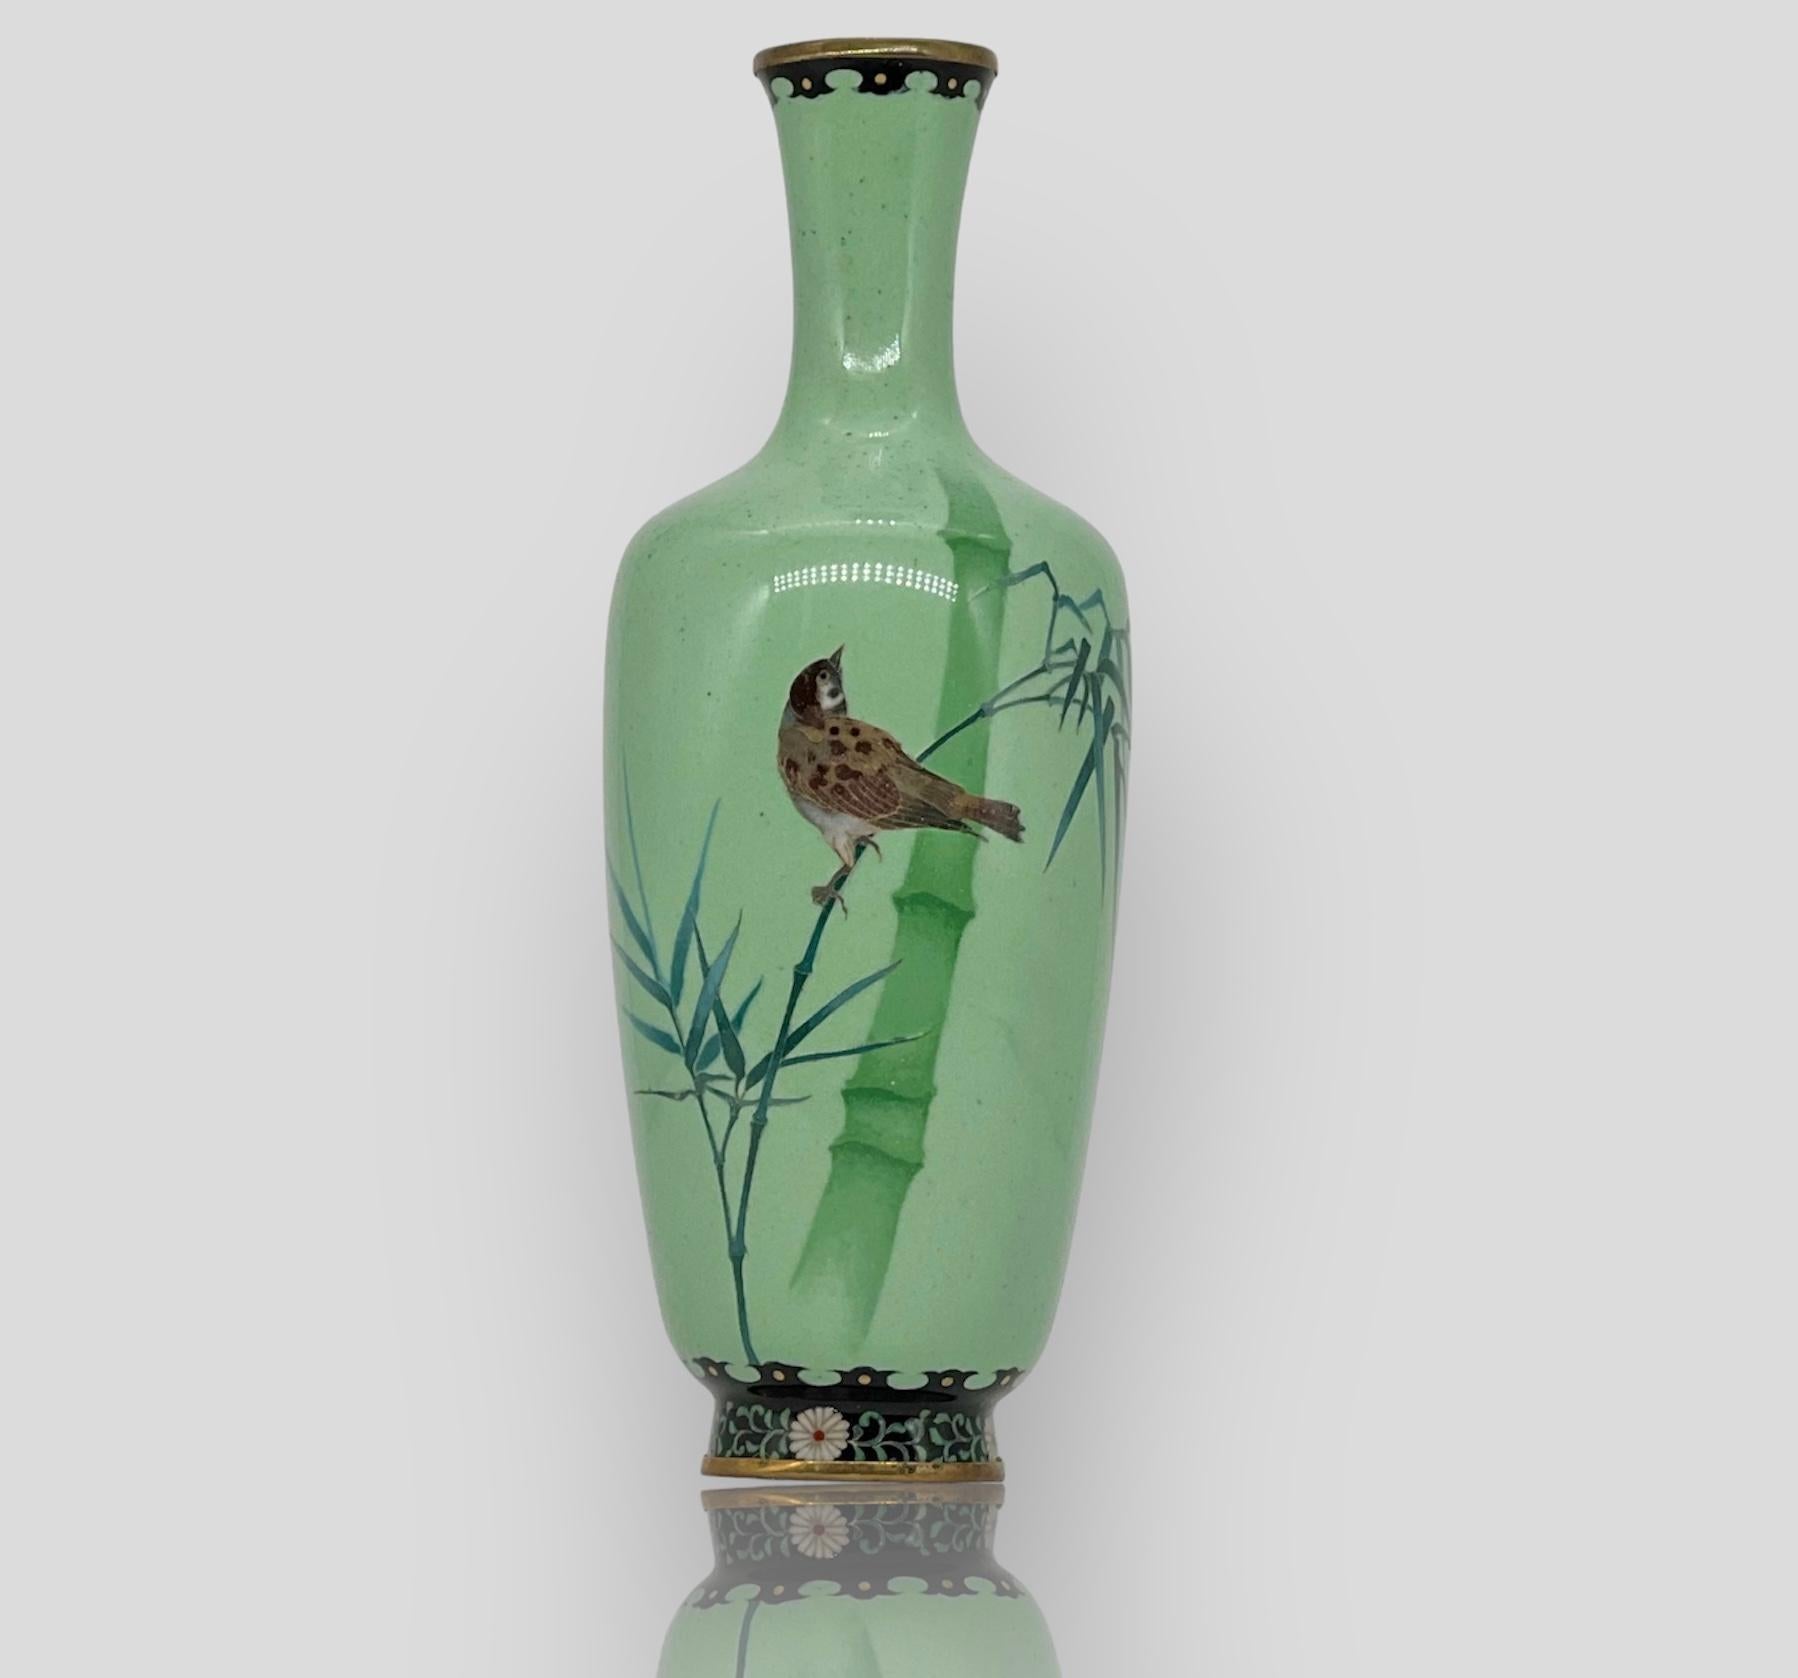 A magnificent Japanese Cloisonne Enamel shouldered vase with a long neck worked in silver wire and wireless technique depicting a two bamboo trees and a bird perched along the branch in the foreground on a pale green ground with a shakudo rim and 